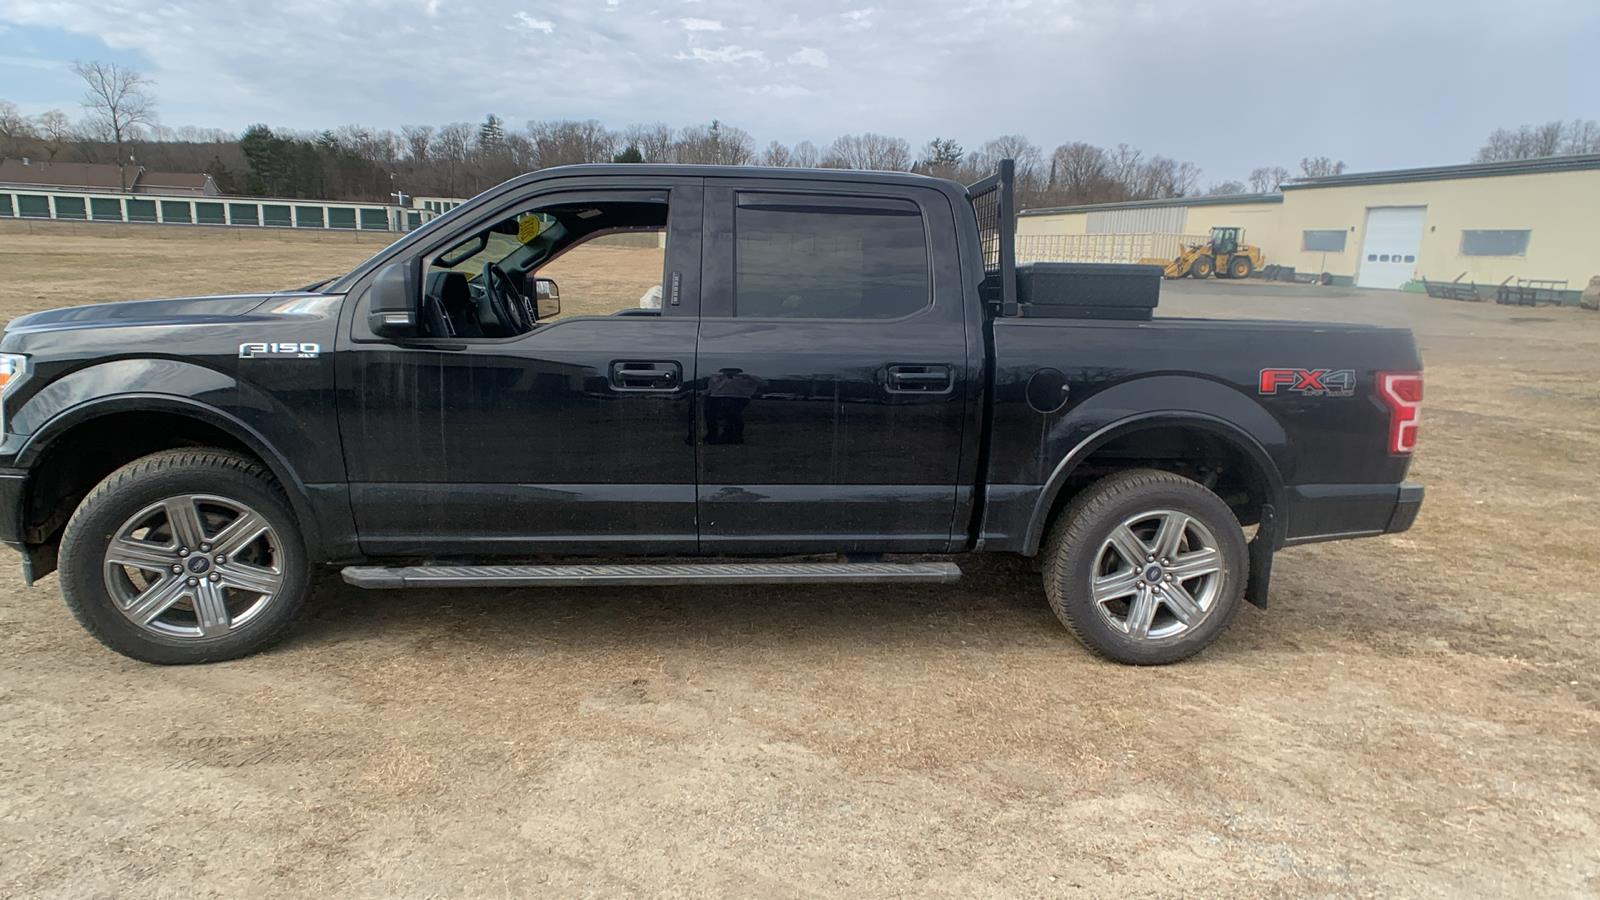 Used 2018 Ford F-150 Short Bed,Crew Cab Pickup